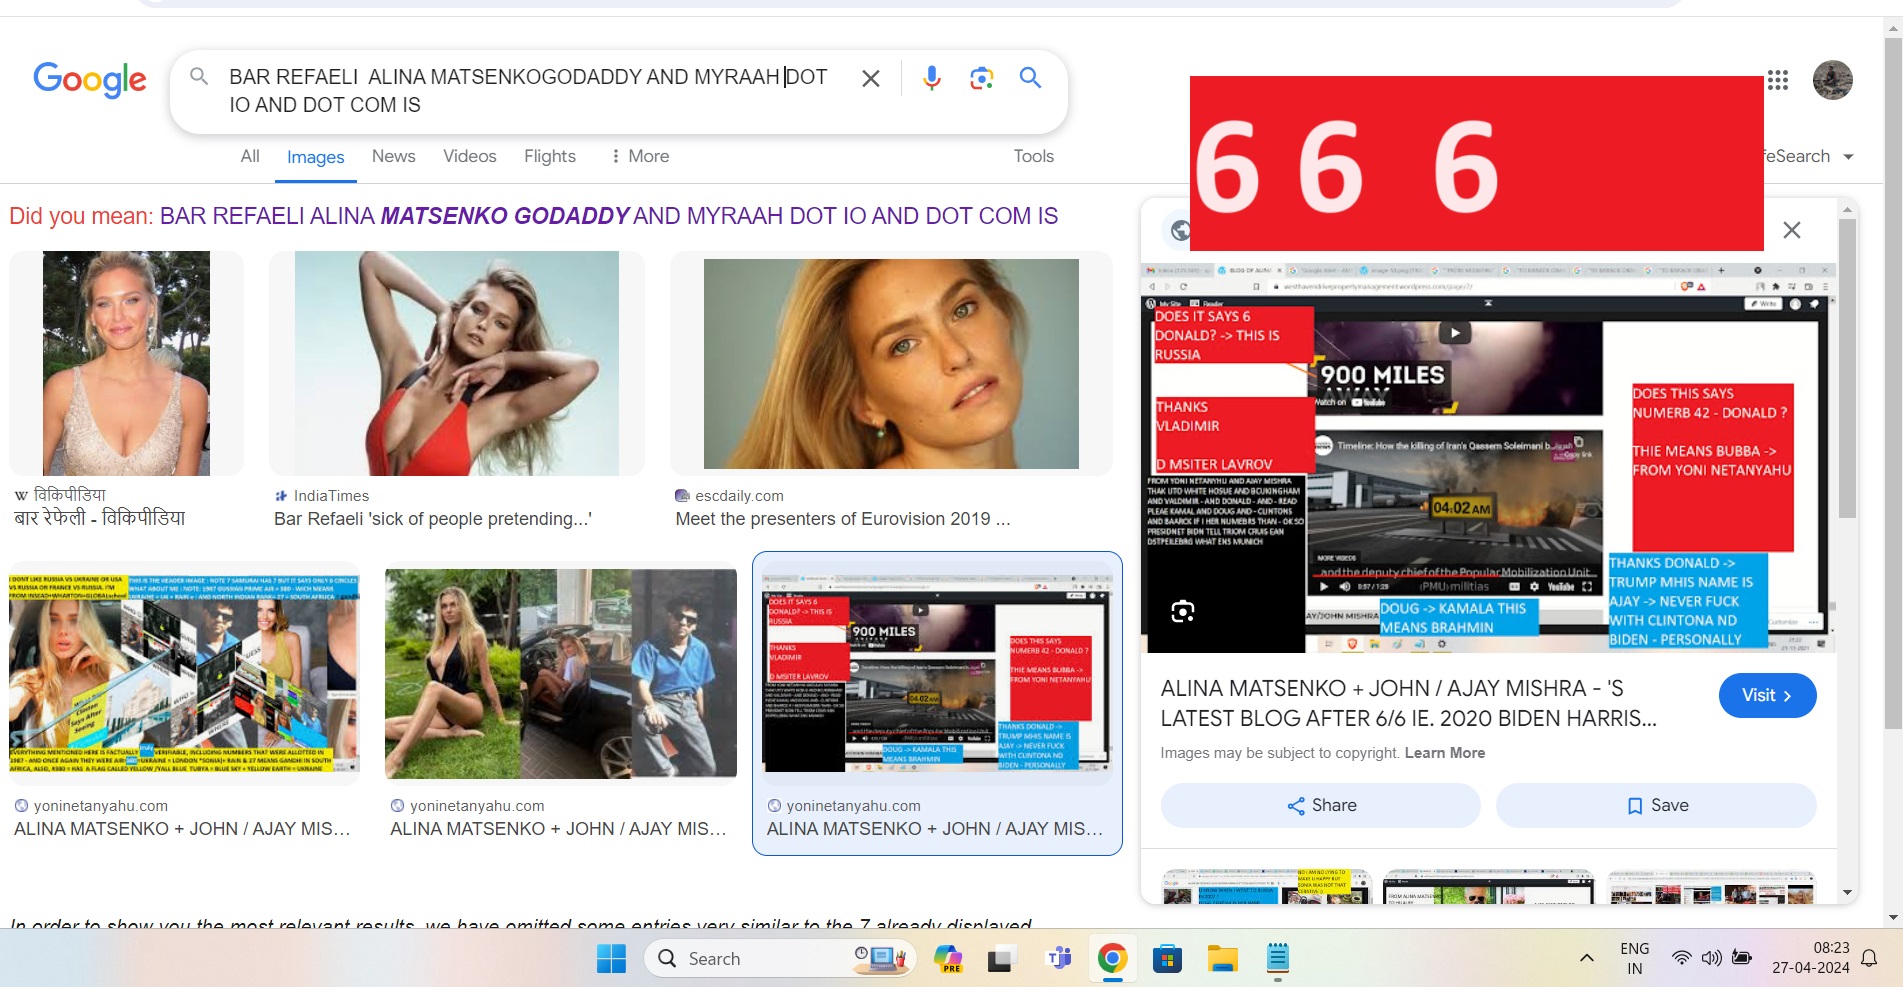 BAR REFAELI ALINA MATSENKOGODADDY AND MYRAAH DOT IO AND DOT COM IS ===6DOES IT SAYS6== SOLEMANI DEAD AND RUSSIA ATTACKED SYRIA FROM 900 MILES APART